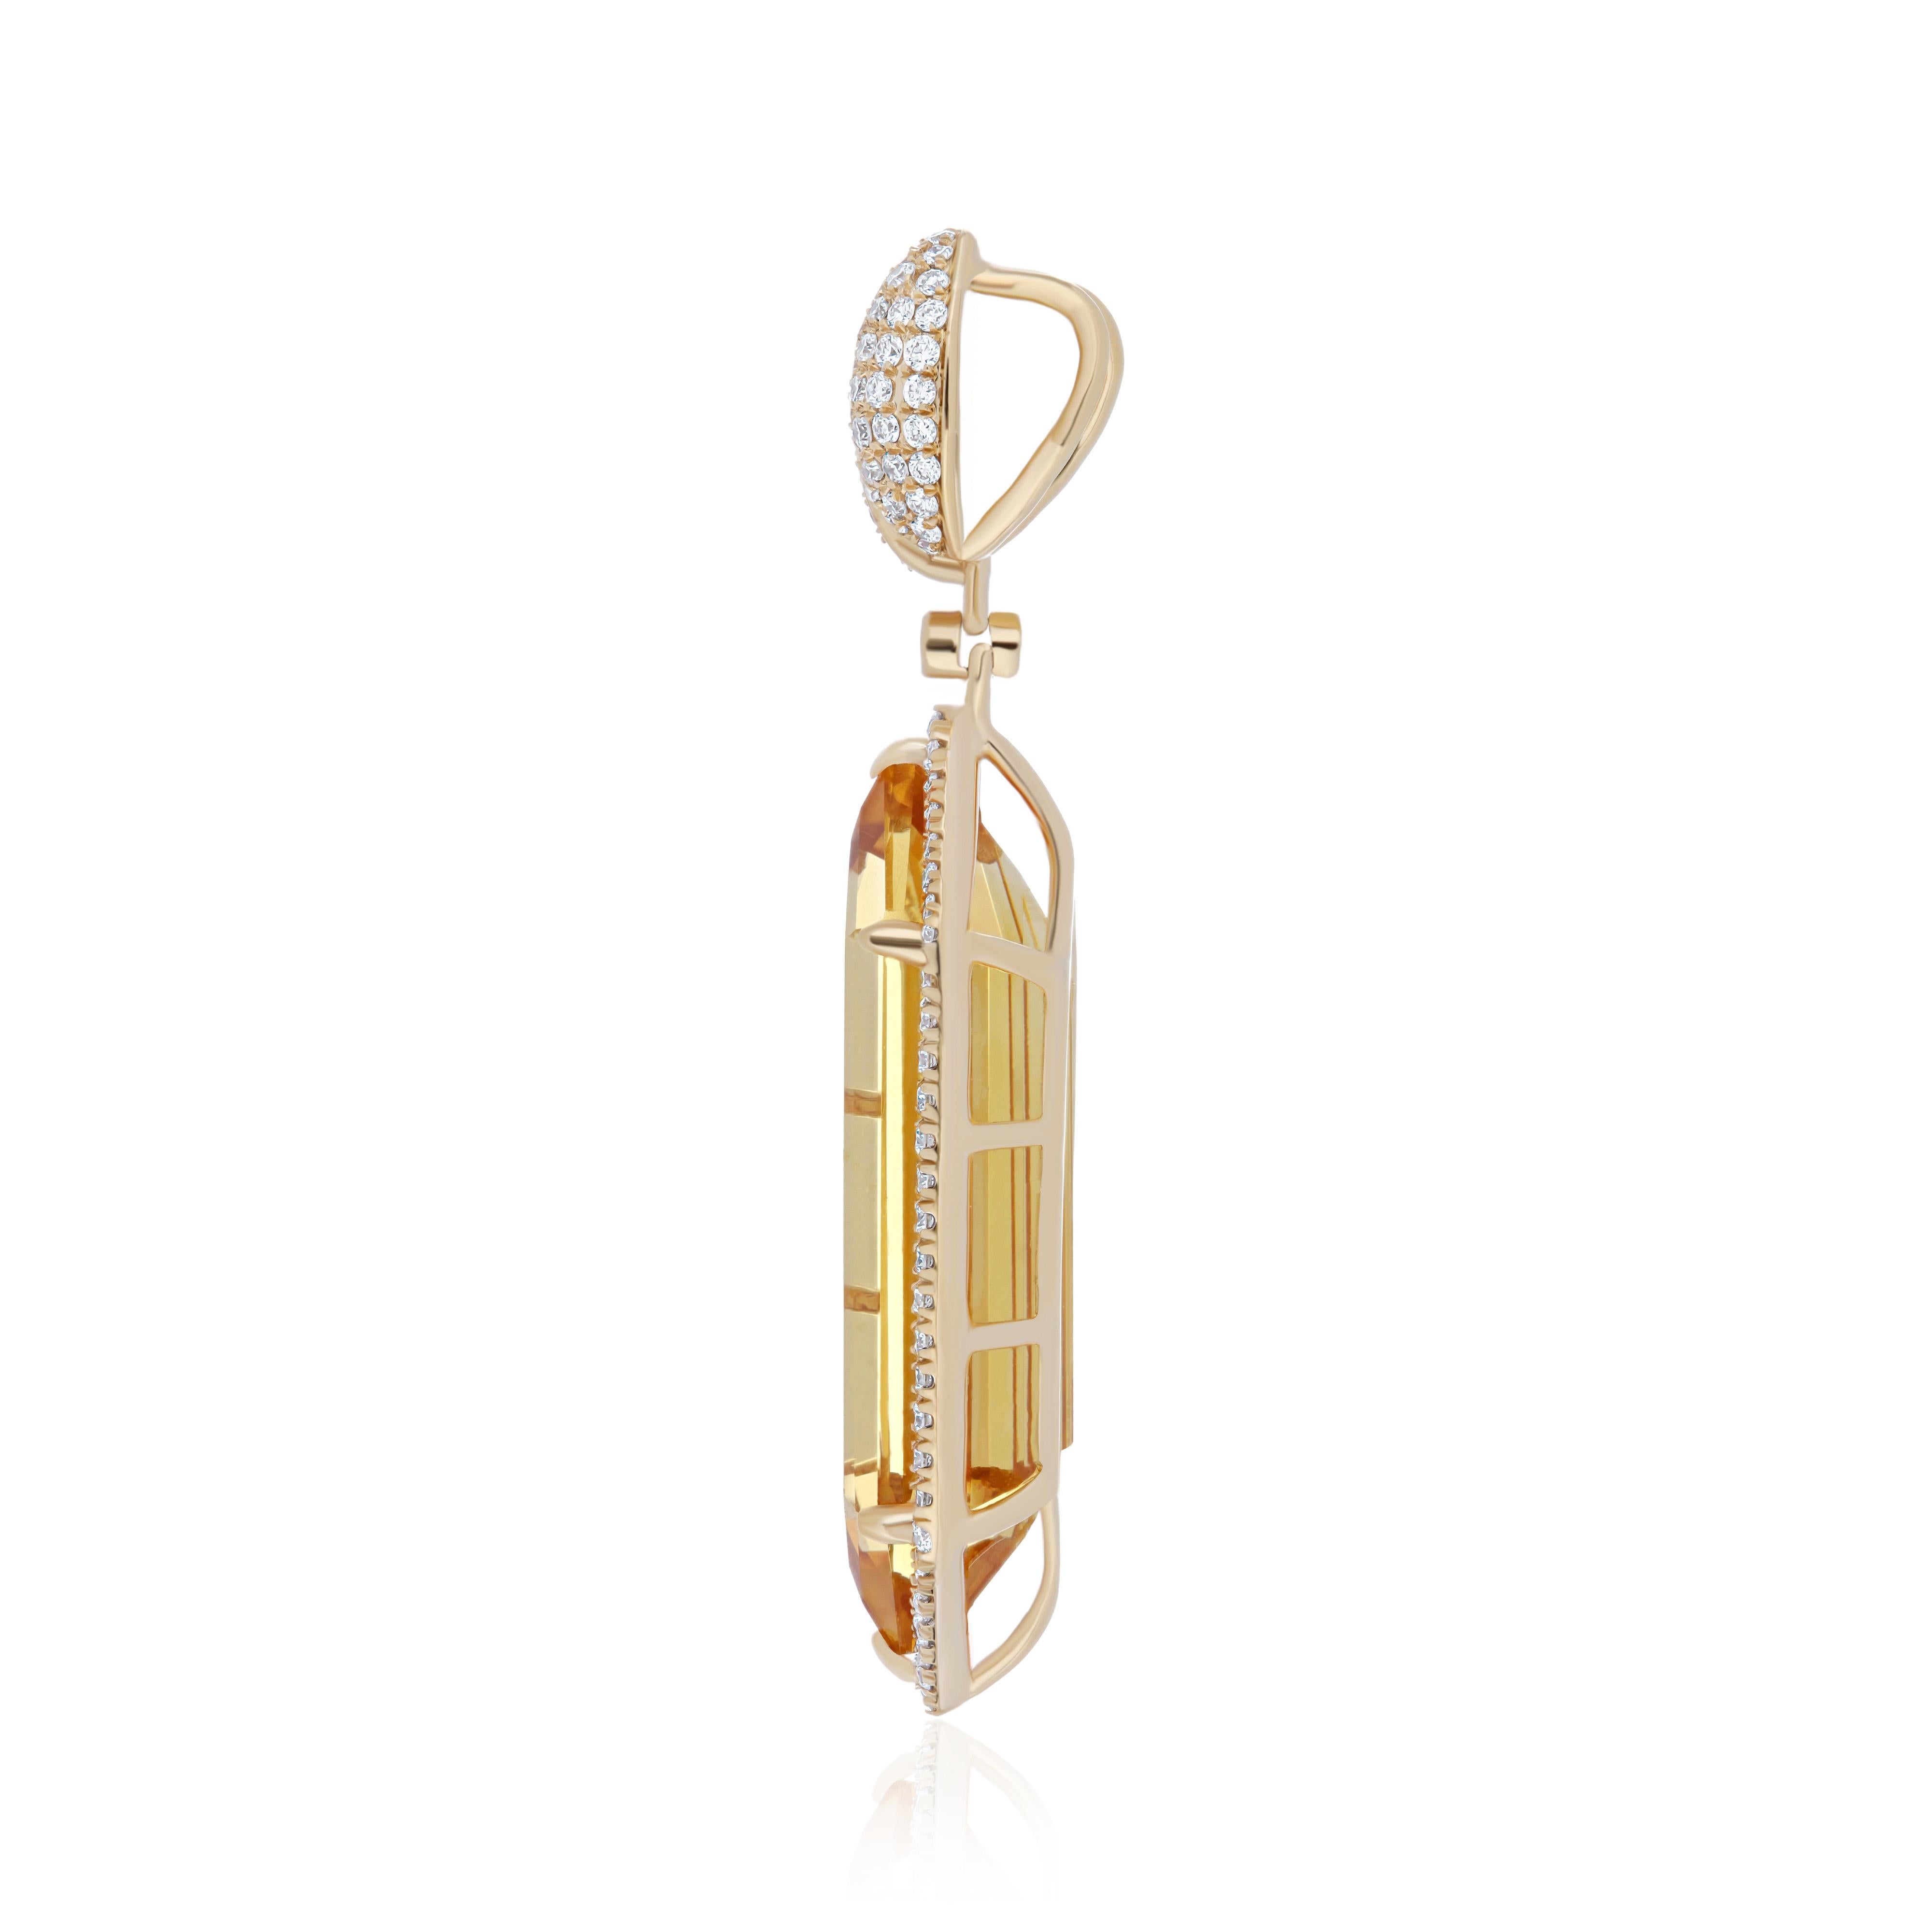 Elegant and Exquisitely Detailed 14Karat Yellow Gold Pendant in Hexagon Shape Citrine weighing approx. 11.15Cts, Pink Sapphire in Round Shape with weighing approx. 0.25Cts and micro prove Set Diamond weighing approx. 0.44Cts Beautifully Hand-Crafted